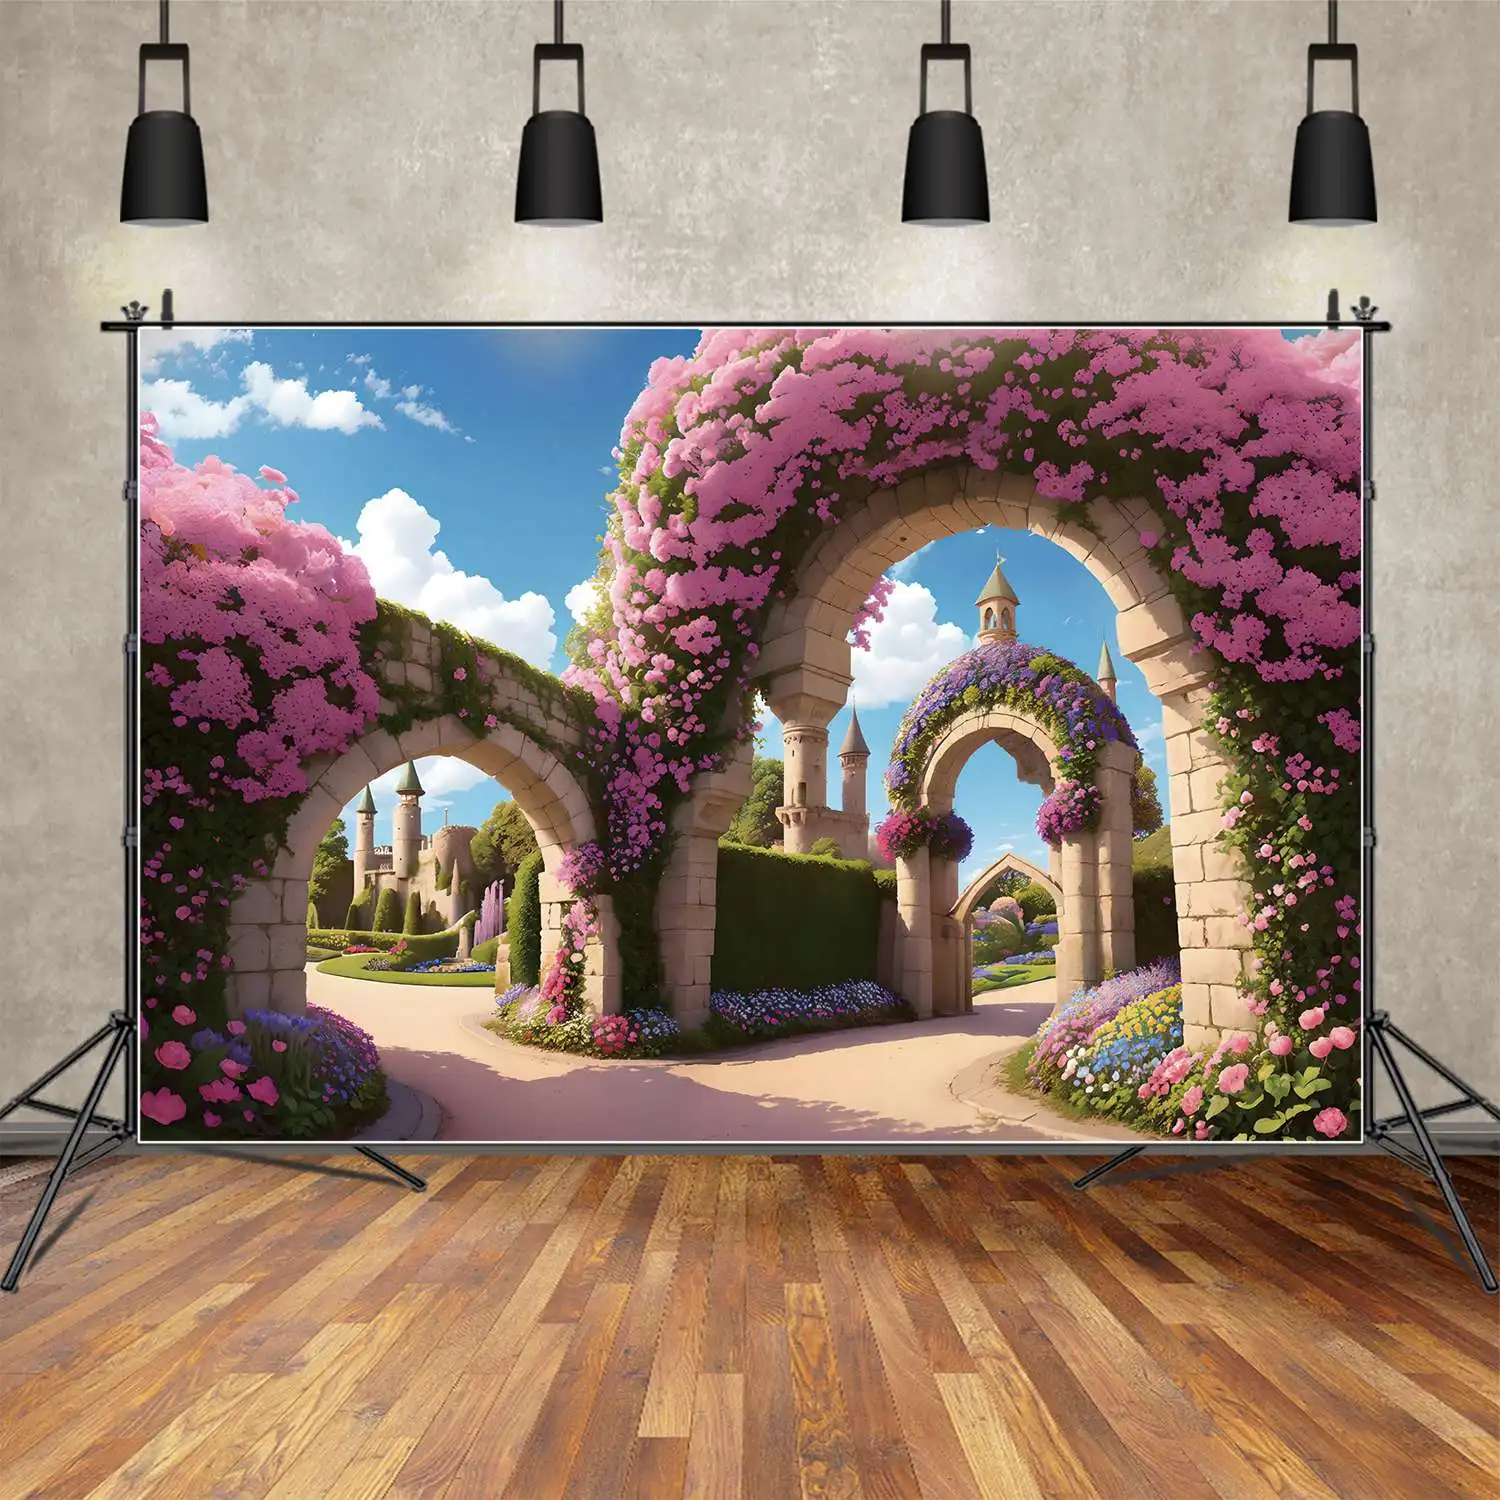 

Spring Flower Princess Backdrop For Birthday Party Customized Children's Pink Blossom Castle Home Photography Backgrounds Props